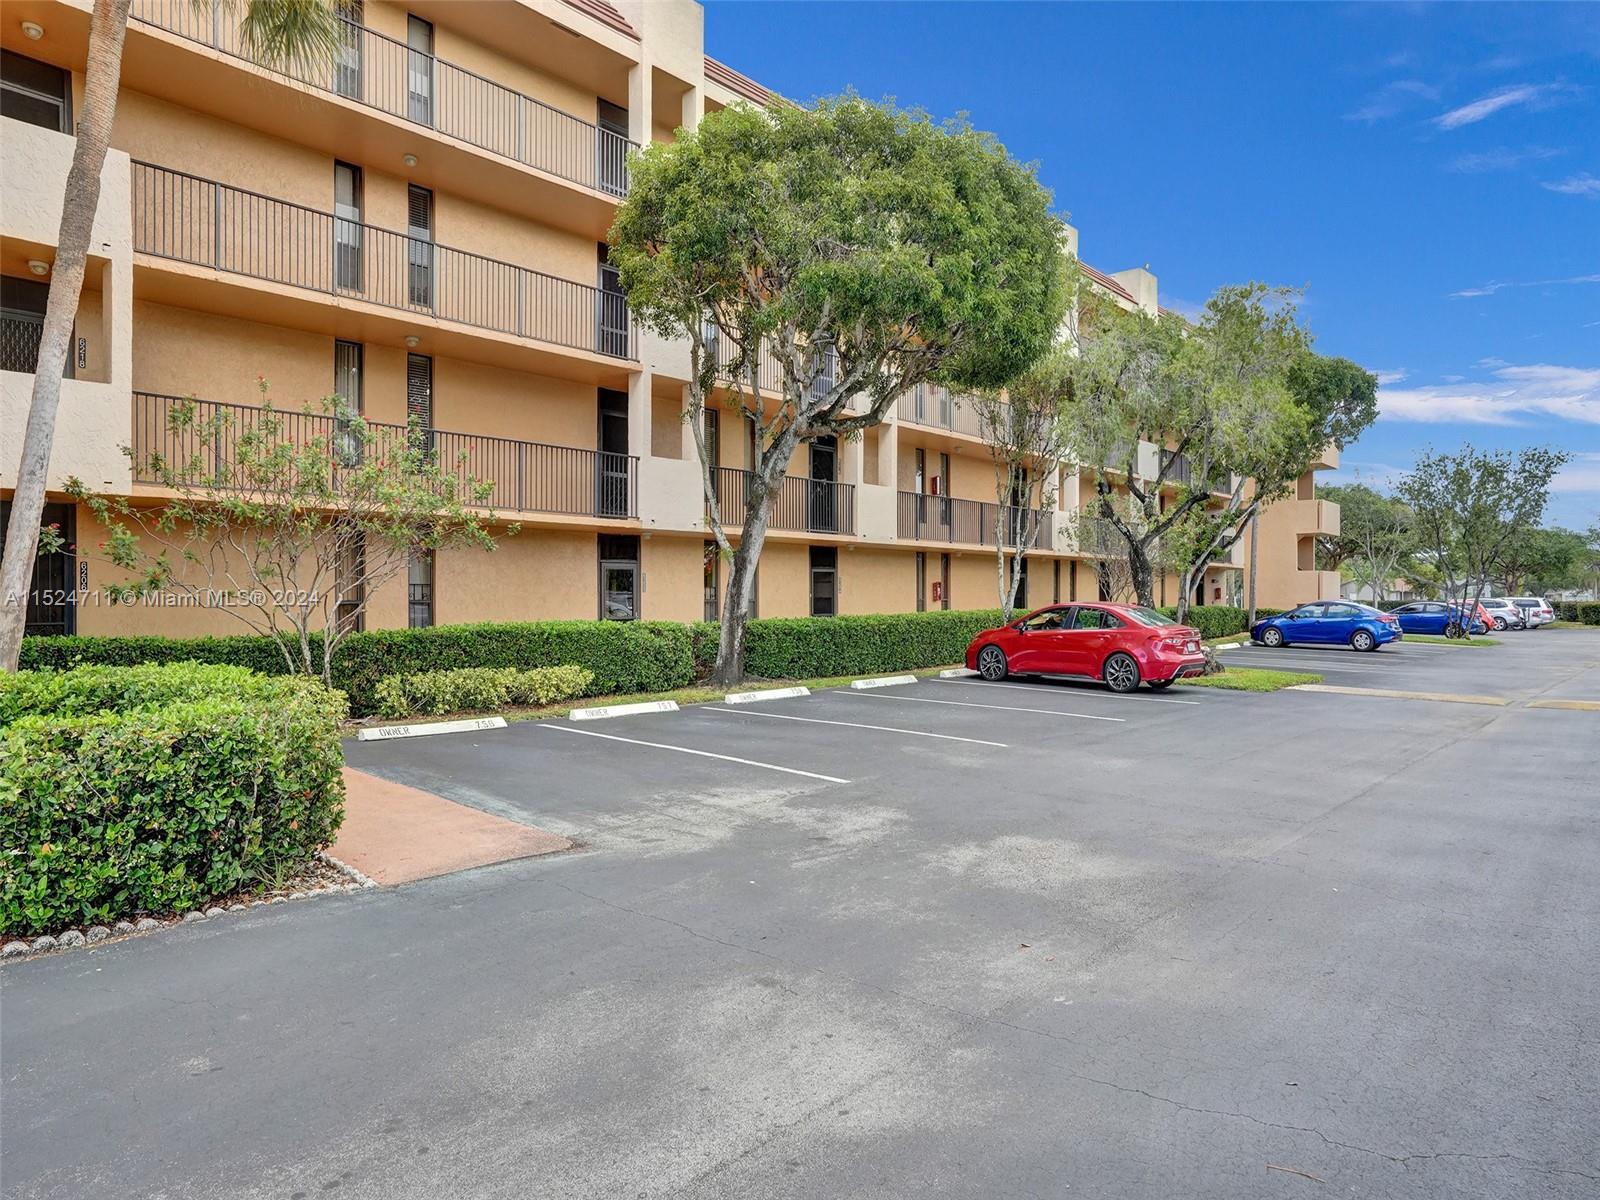 Photo of 6228 Coral Lake Dr #304 in Margate, FL